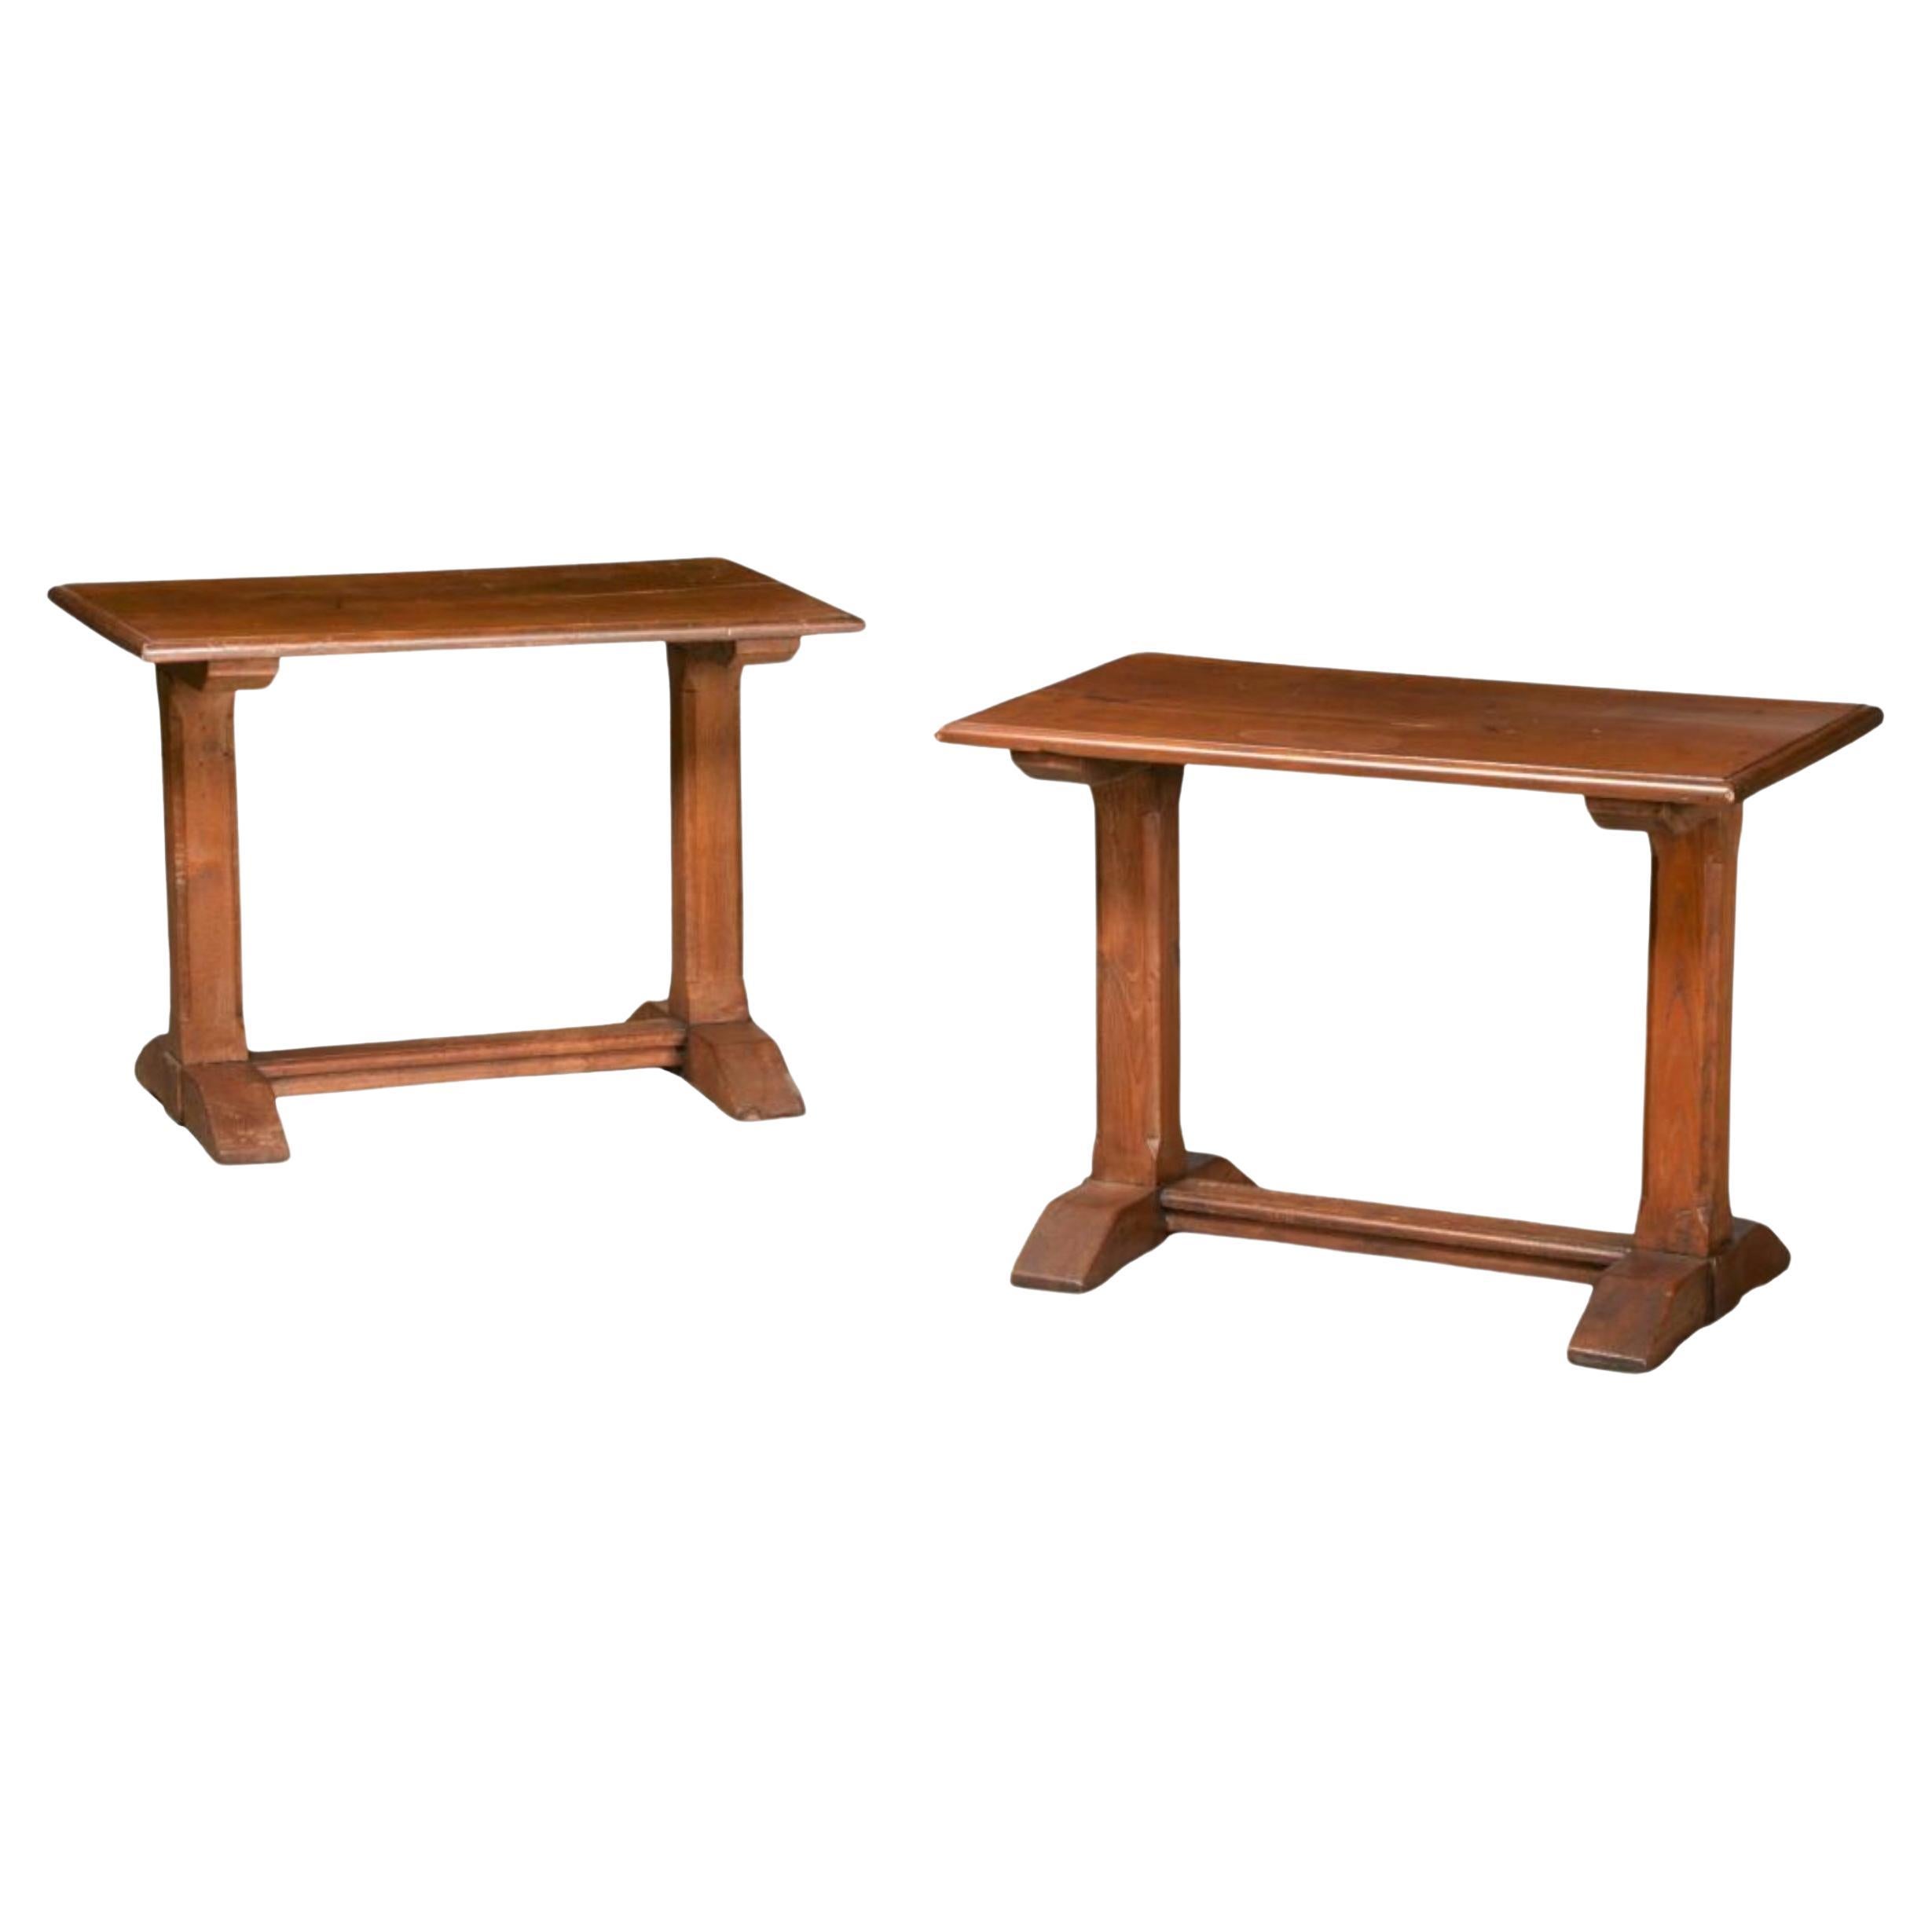 Perfect for the family room! This is a pair of rustic French carved walnut side tables attributed to Grange. Their simplicity makes them very versatile. They are in very good condition.